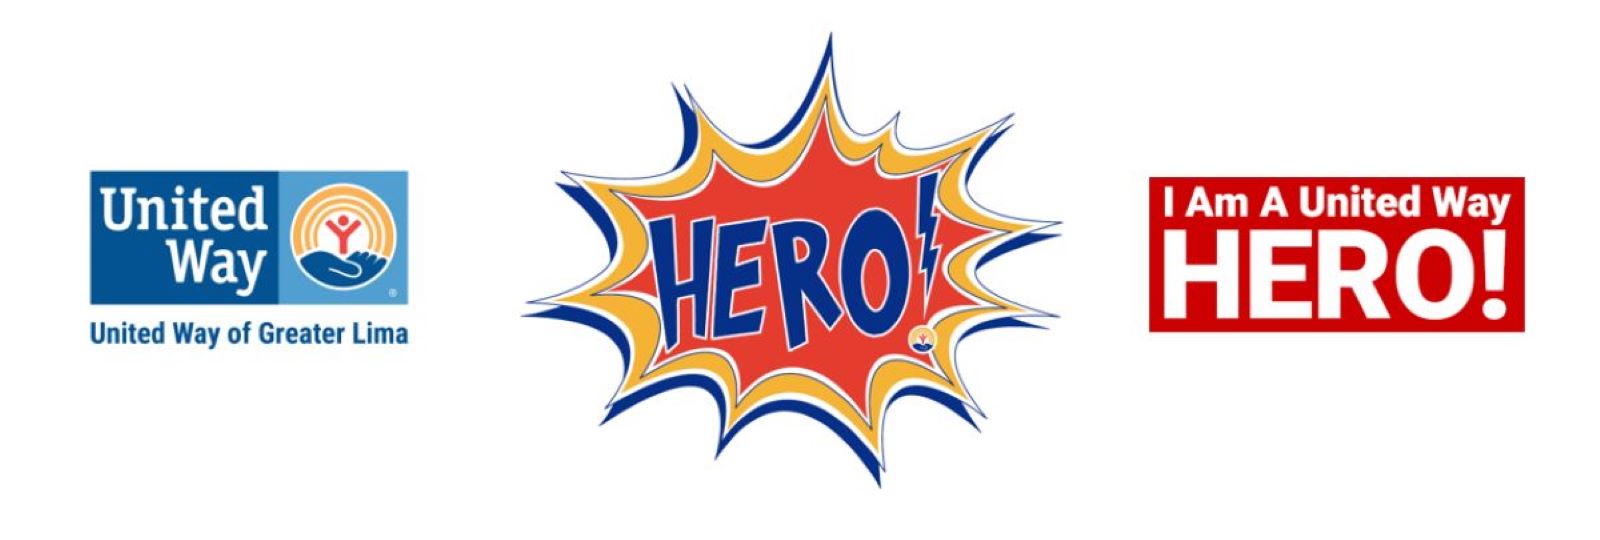 Be a United Way Hero Banner image